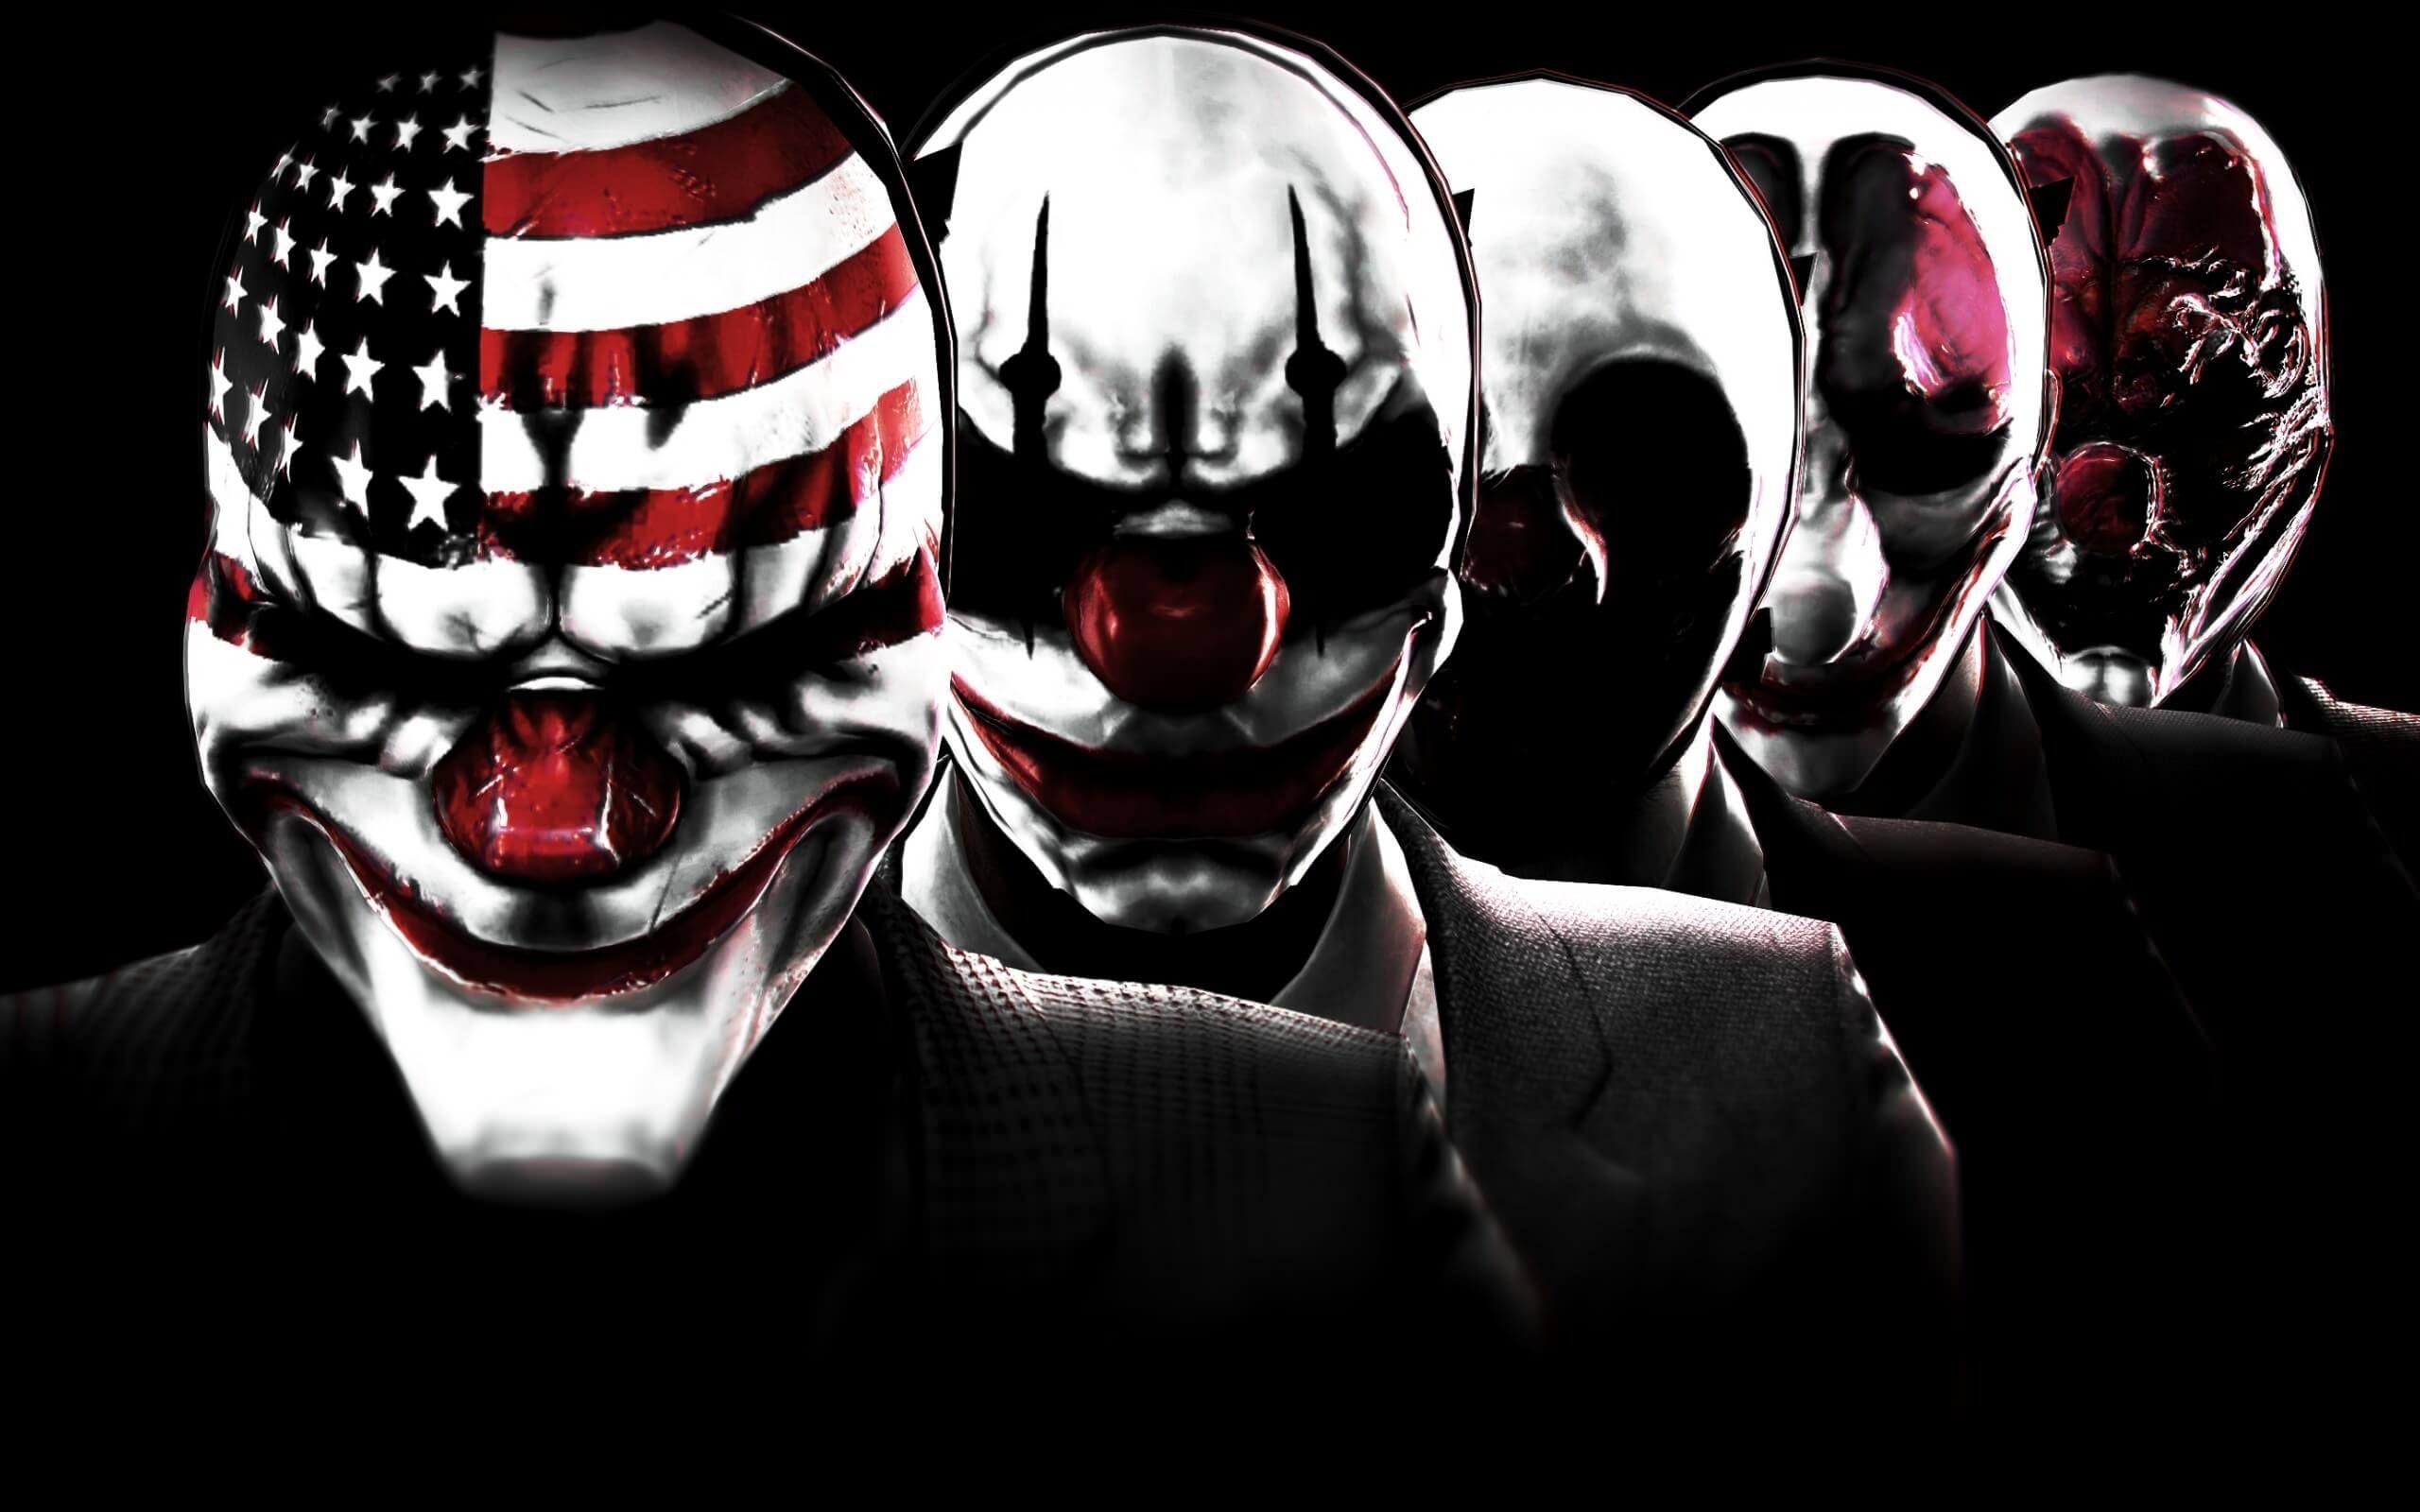 payday 2 steam download free